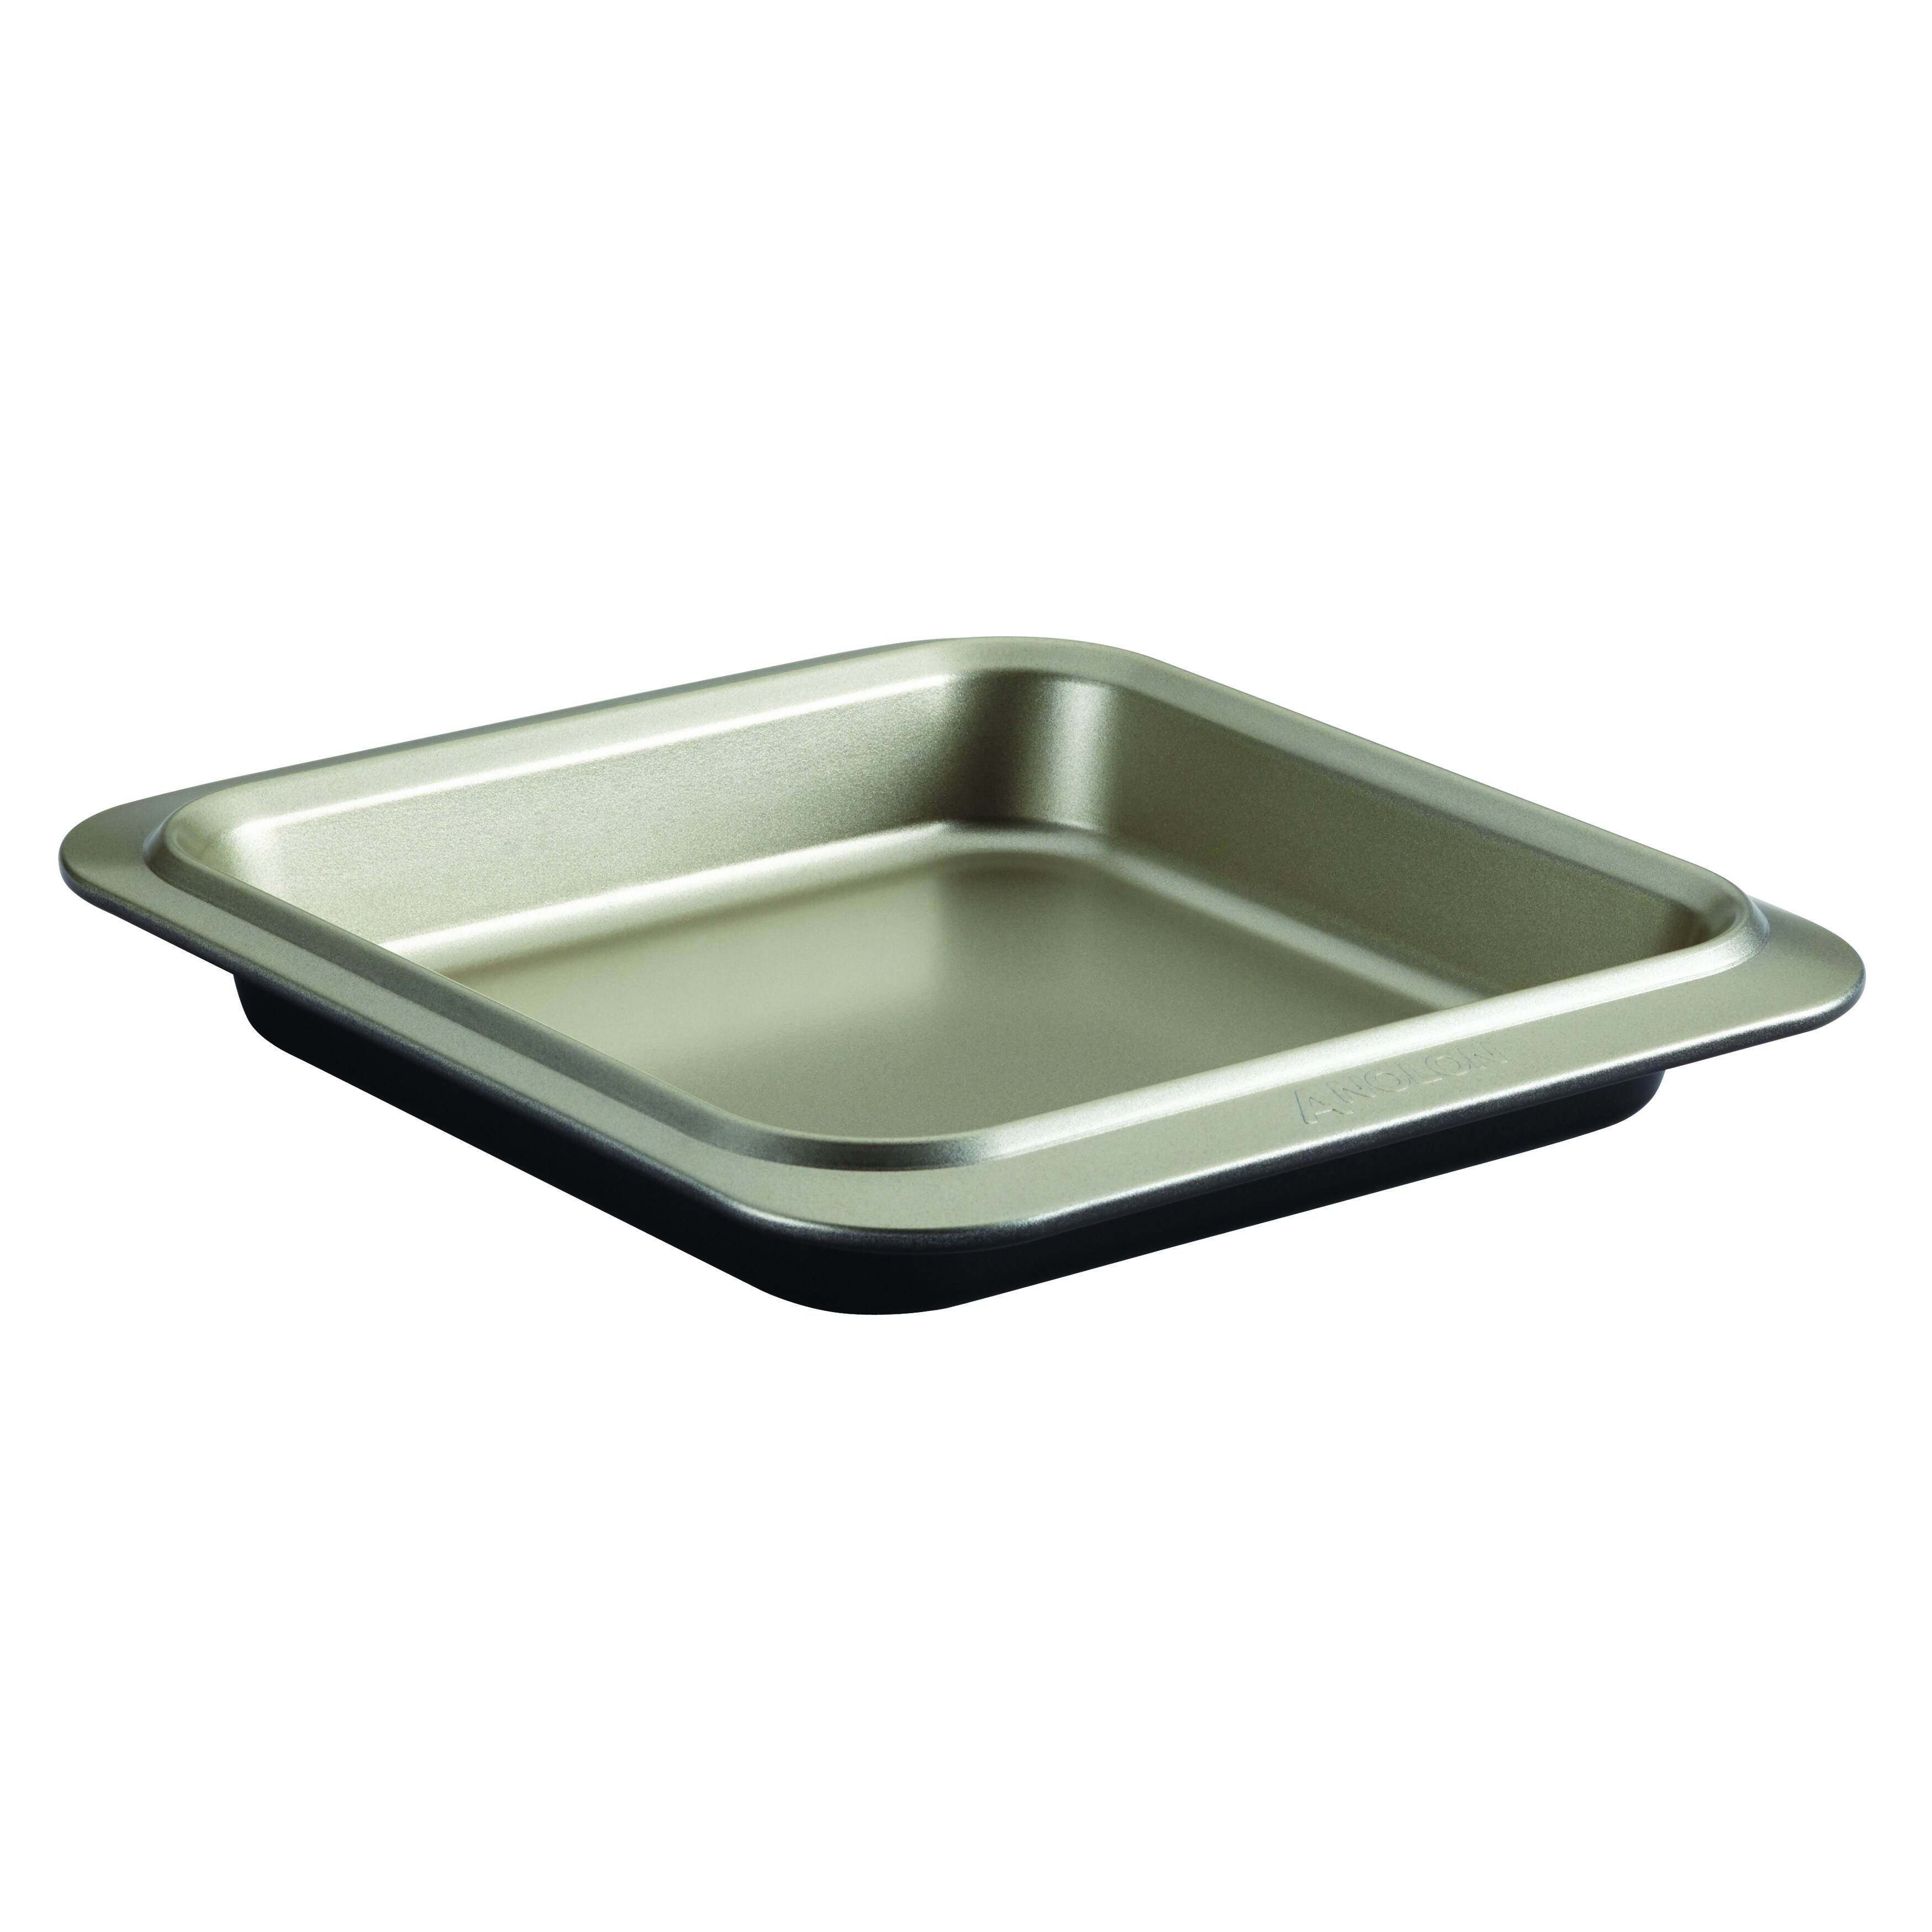 https://ak1.ostkcdn.com/images/products/10390866/Anolon-Pewter-Onyx-Nonstick-Bakeware-Square-Cake-Pan-752ca899-1c60-4727-a969-ef5d0bd4673e.jpg